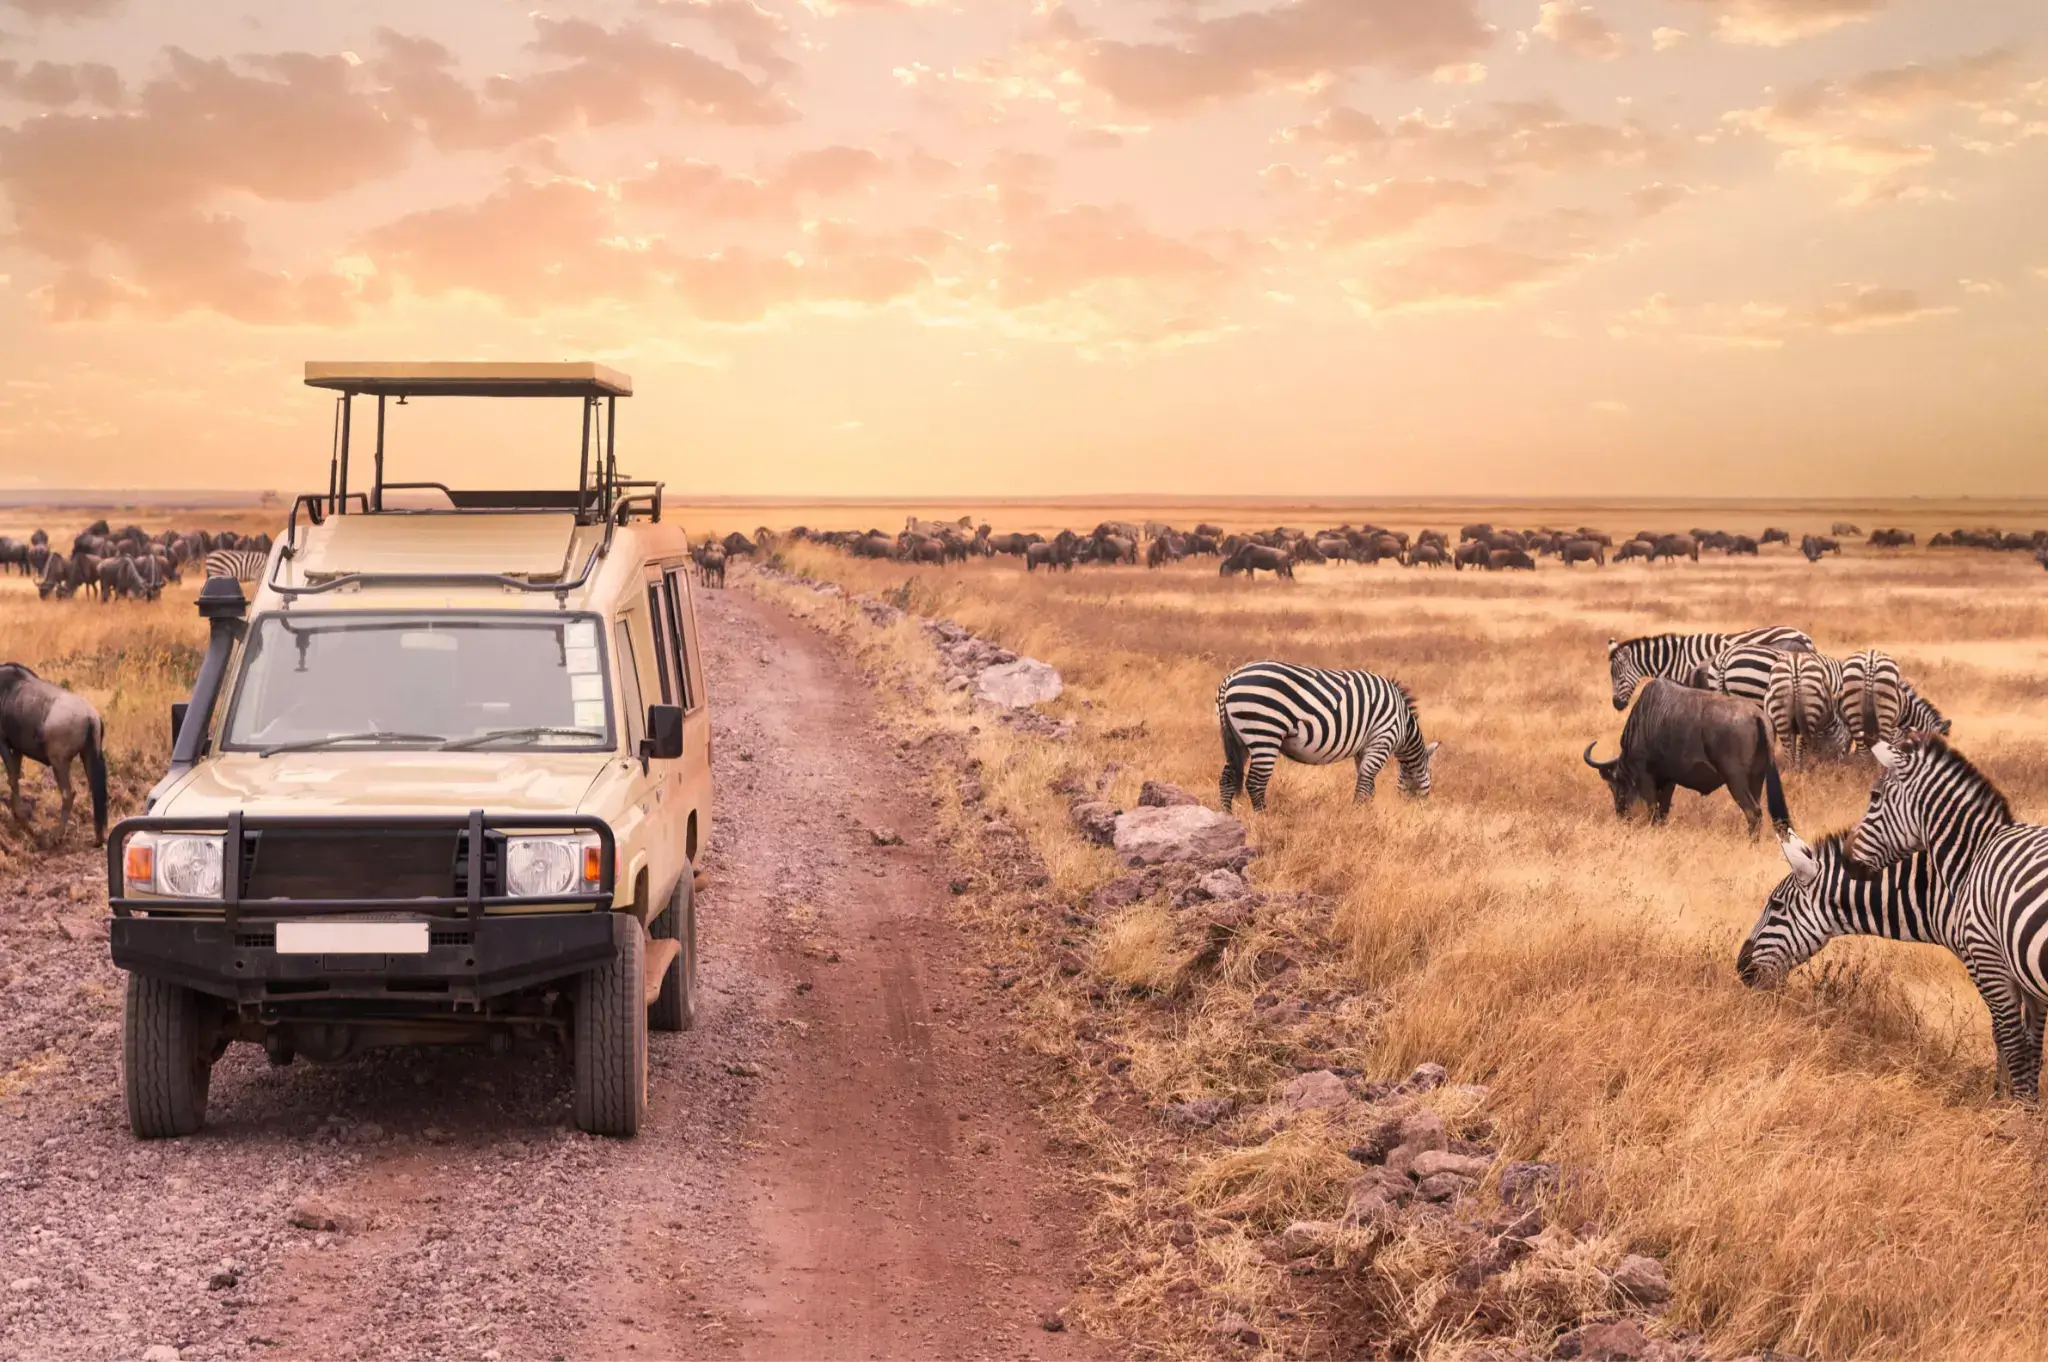 A safari jeep surrounded by wilderness of wildebeest and zebra's in Tanzanian national parks